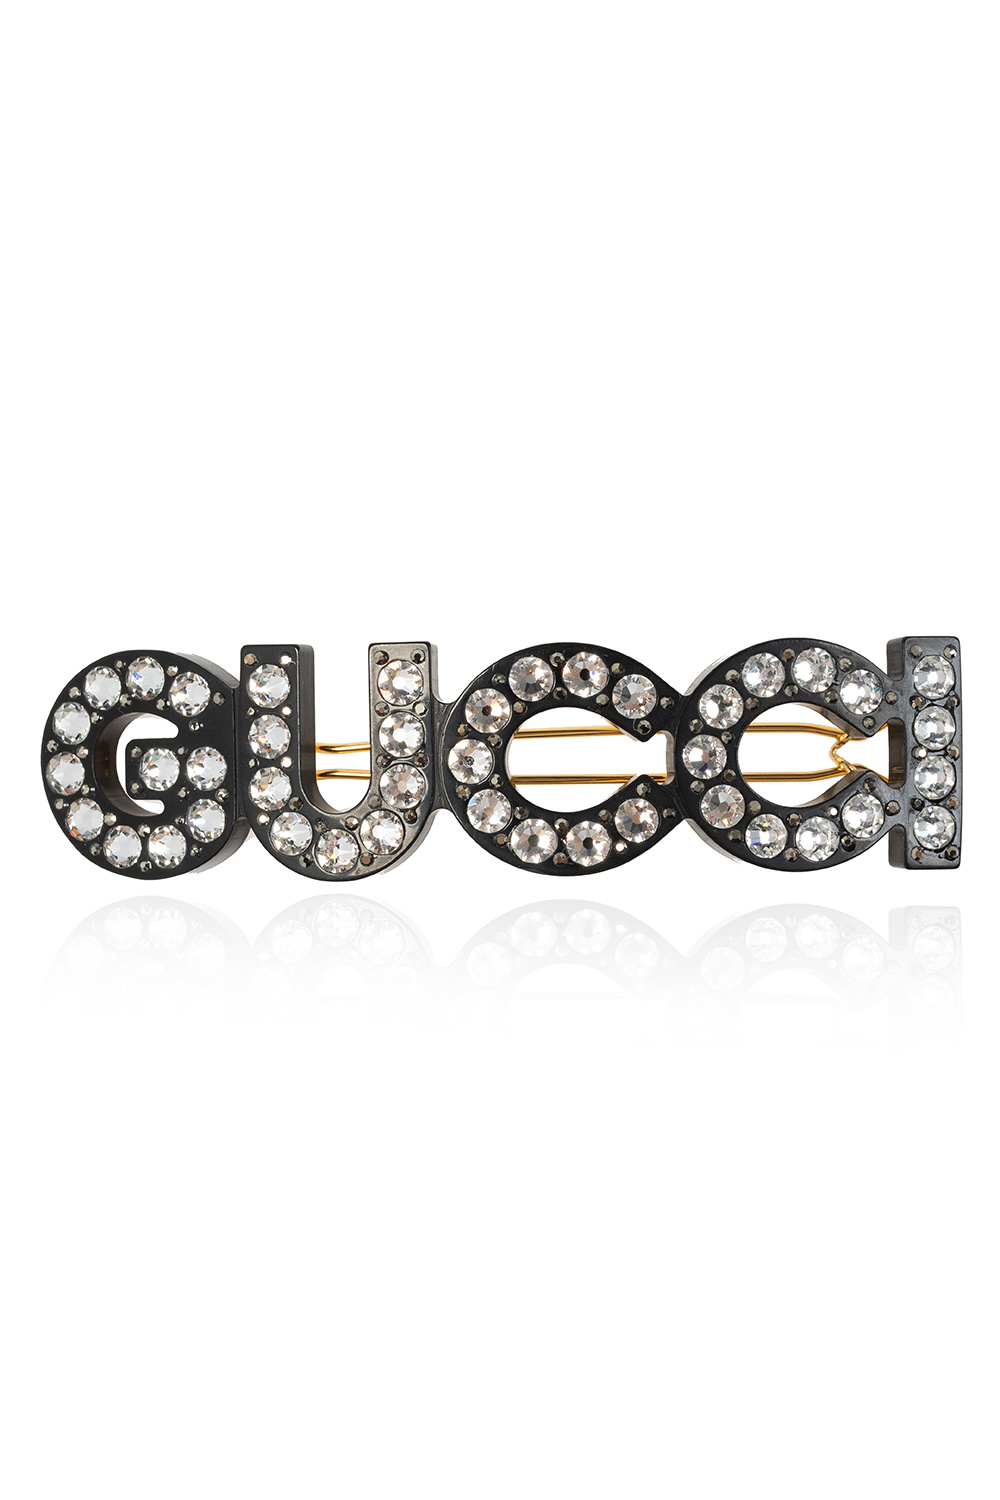 Gucci gucci gucci garden snake inspired ring item